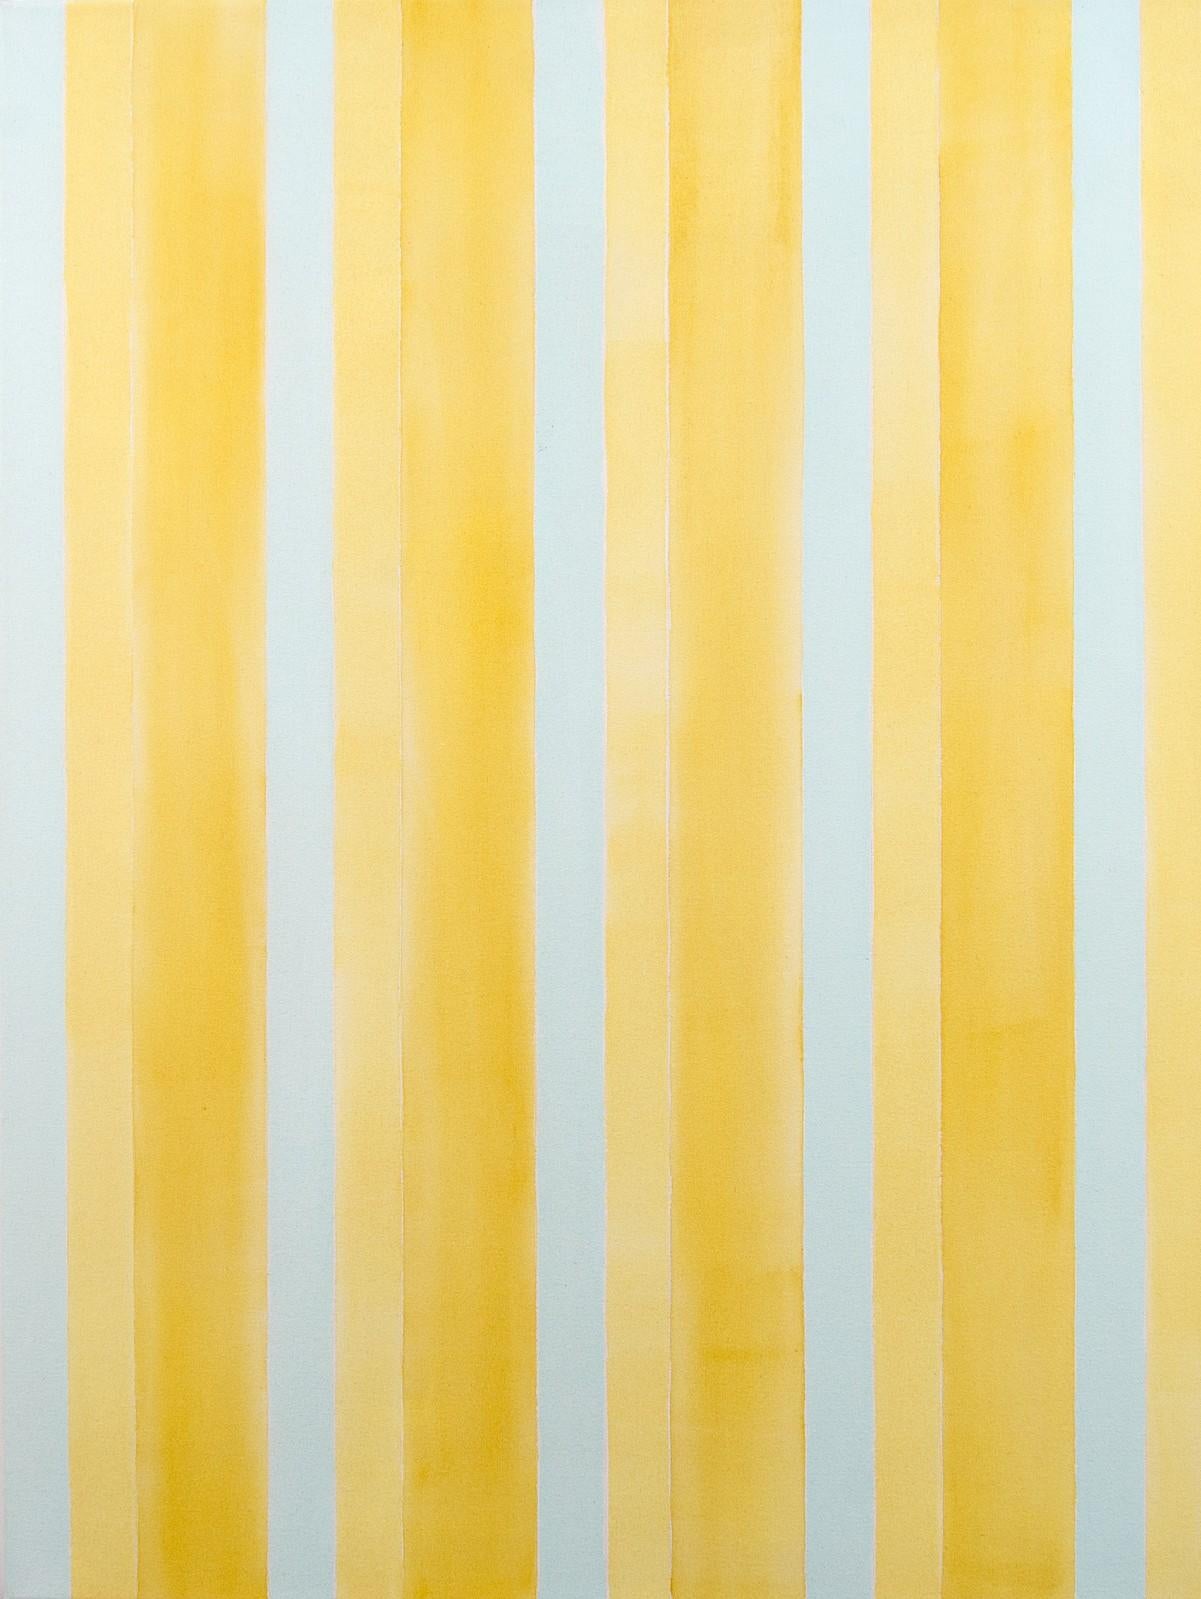 Milly Ristvedt Abstract Painting - Breathing Space for Agnes - large, bright, yellow, stripes, acrylic on canvas